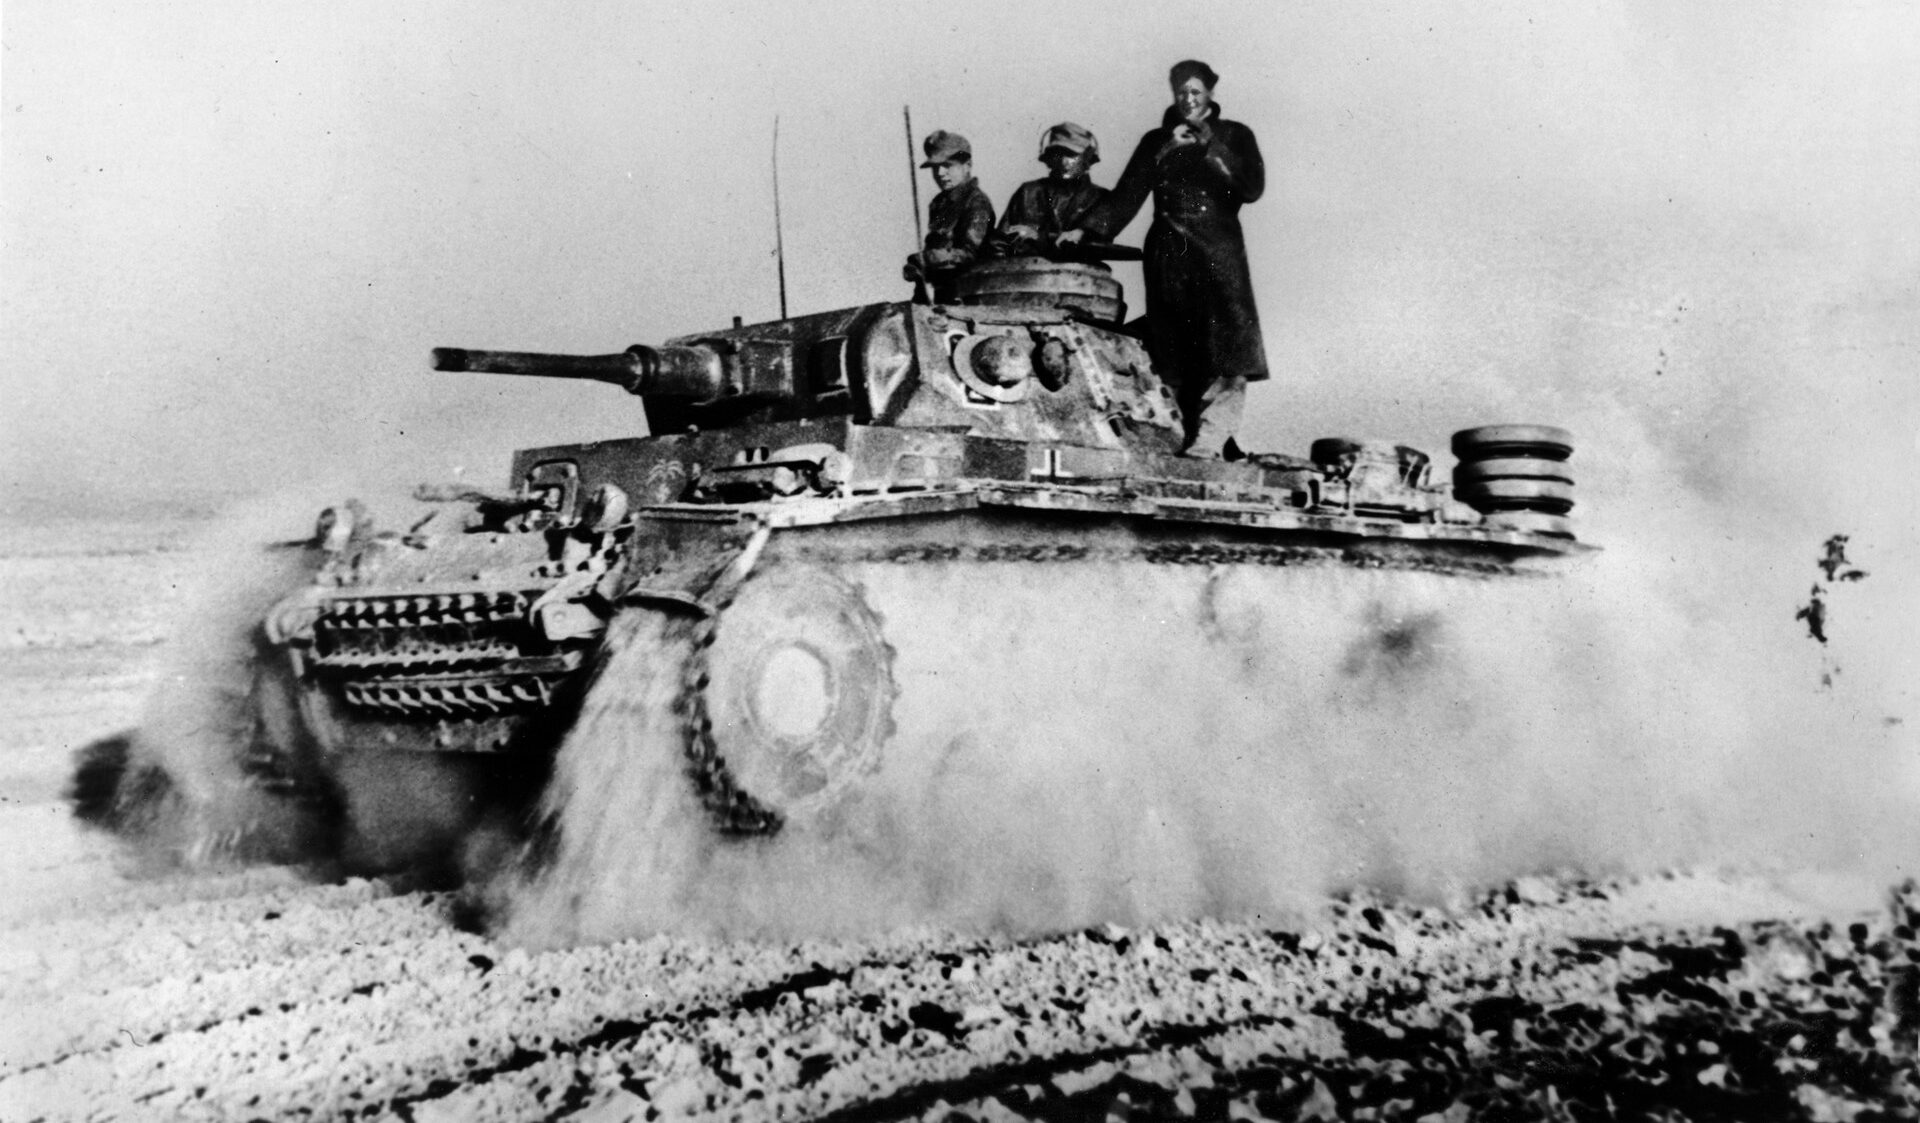 A PzKpfw. III churns up a cloud of desert sand as it advances across the battlefield in June 1942. The German victory at Gazala sent the British reeling back across the Egyptian frontier to El Alamein.